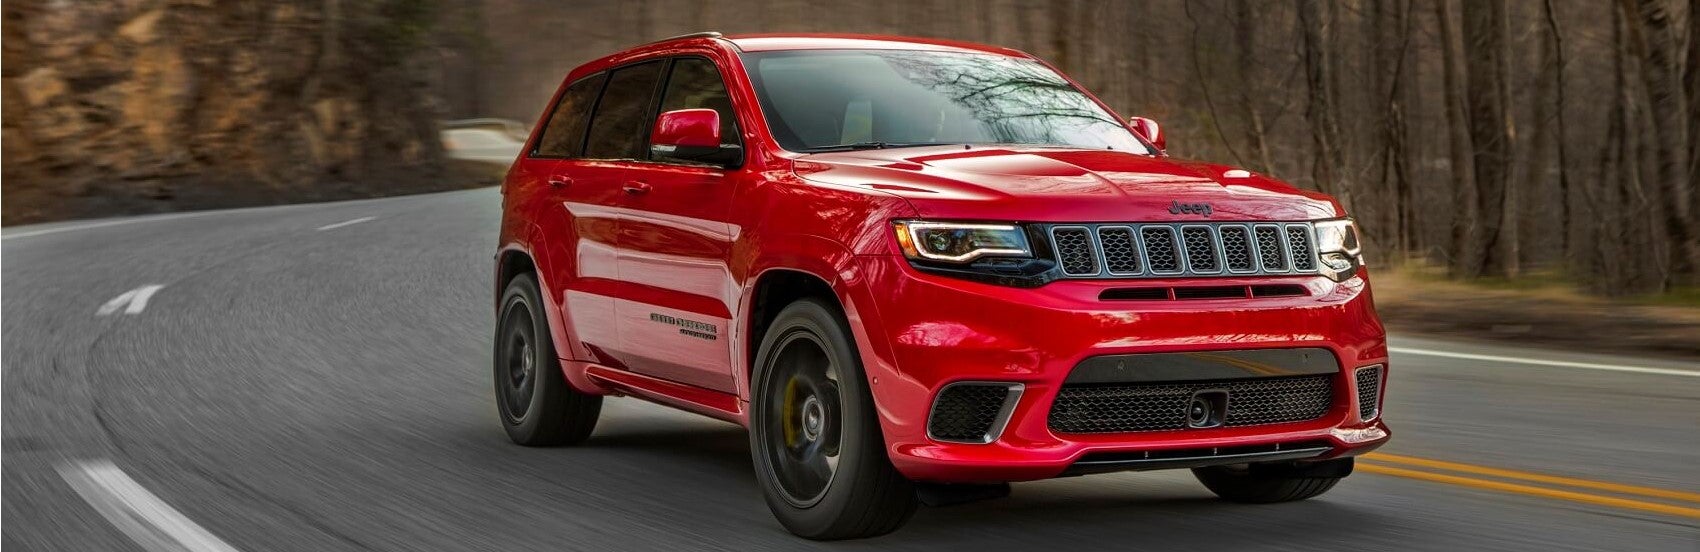 Jeep Grand Cherokee in Red Snipped